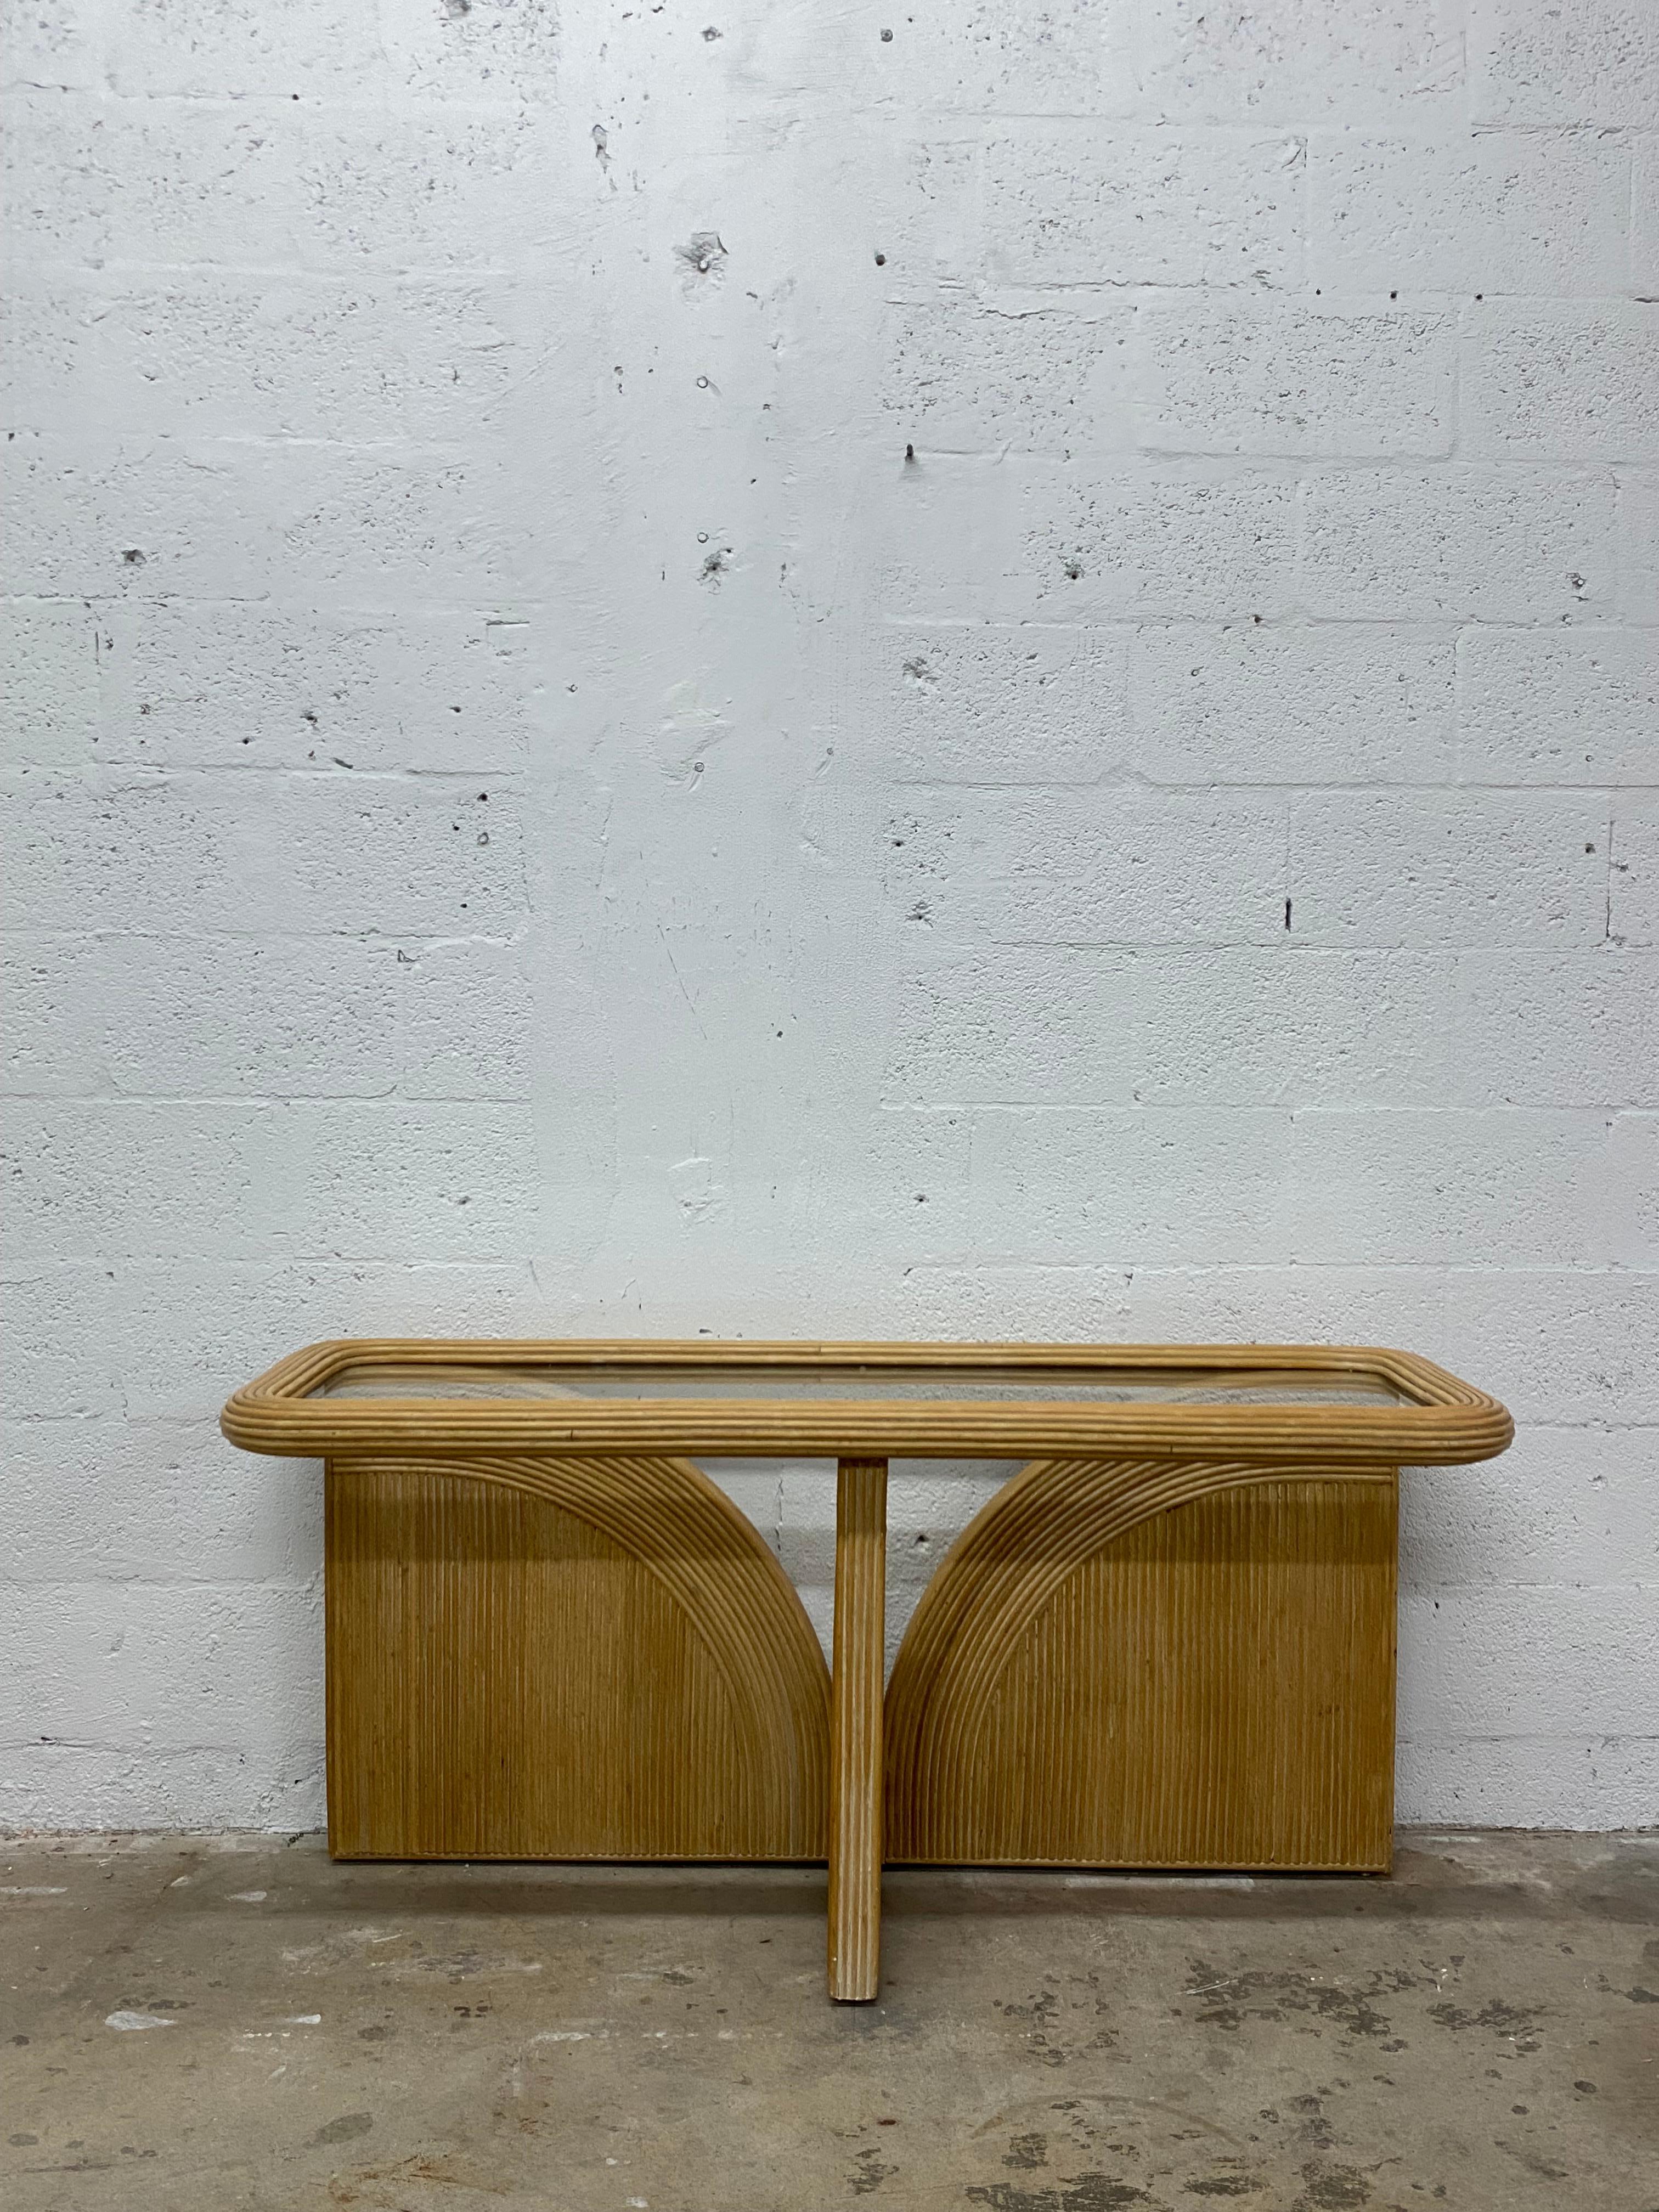 Organic Modern Pencil Reed and Glass Console Table, 1980s For Sale 3